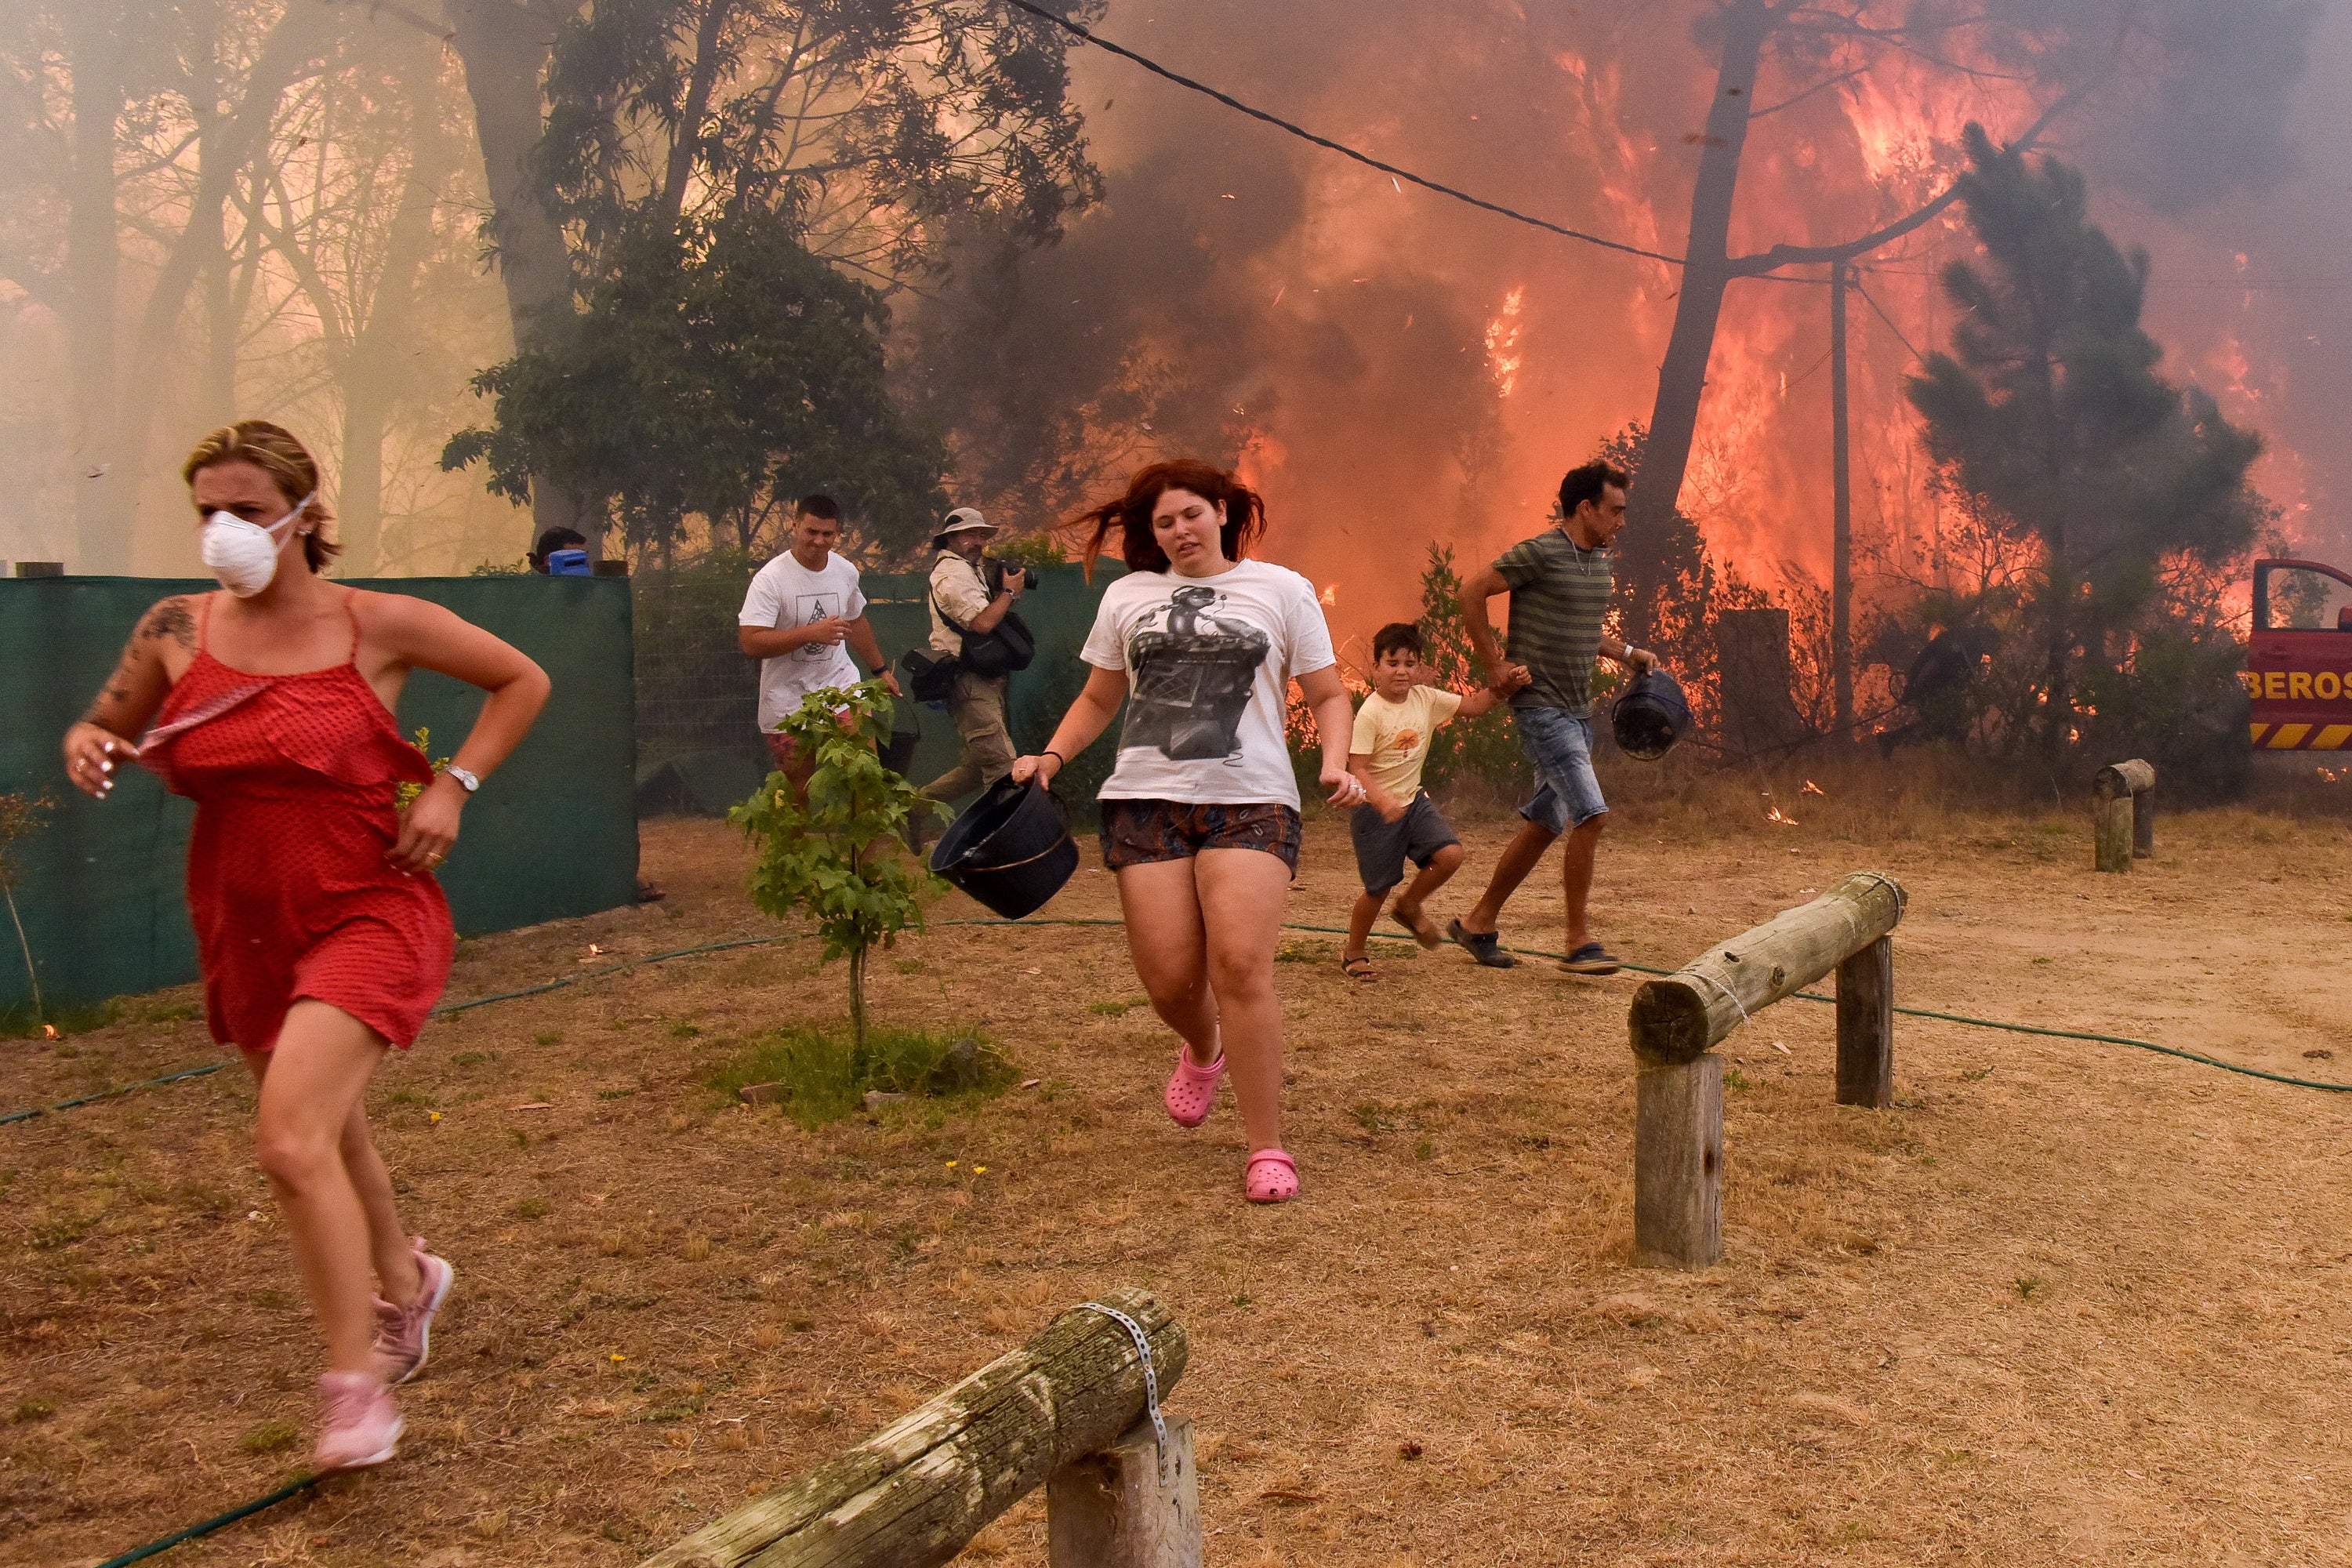 People run from flames during fire in La Floresta, Uruguay